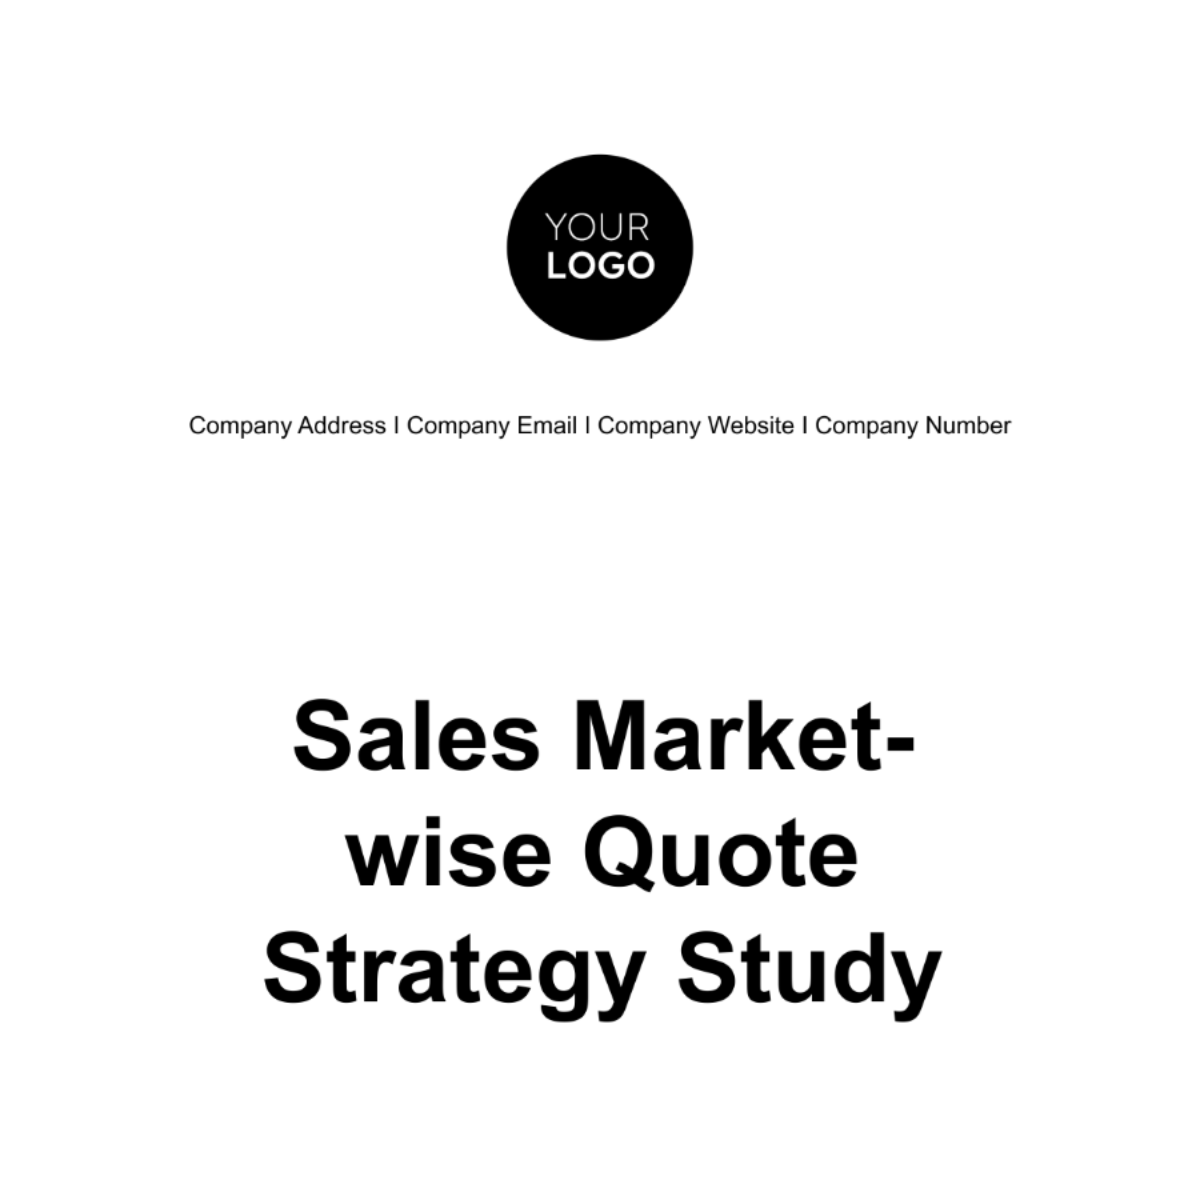 Free Sales Market-wise Quote Strategy Study Template